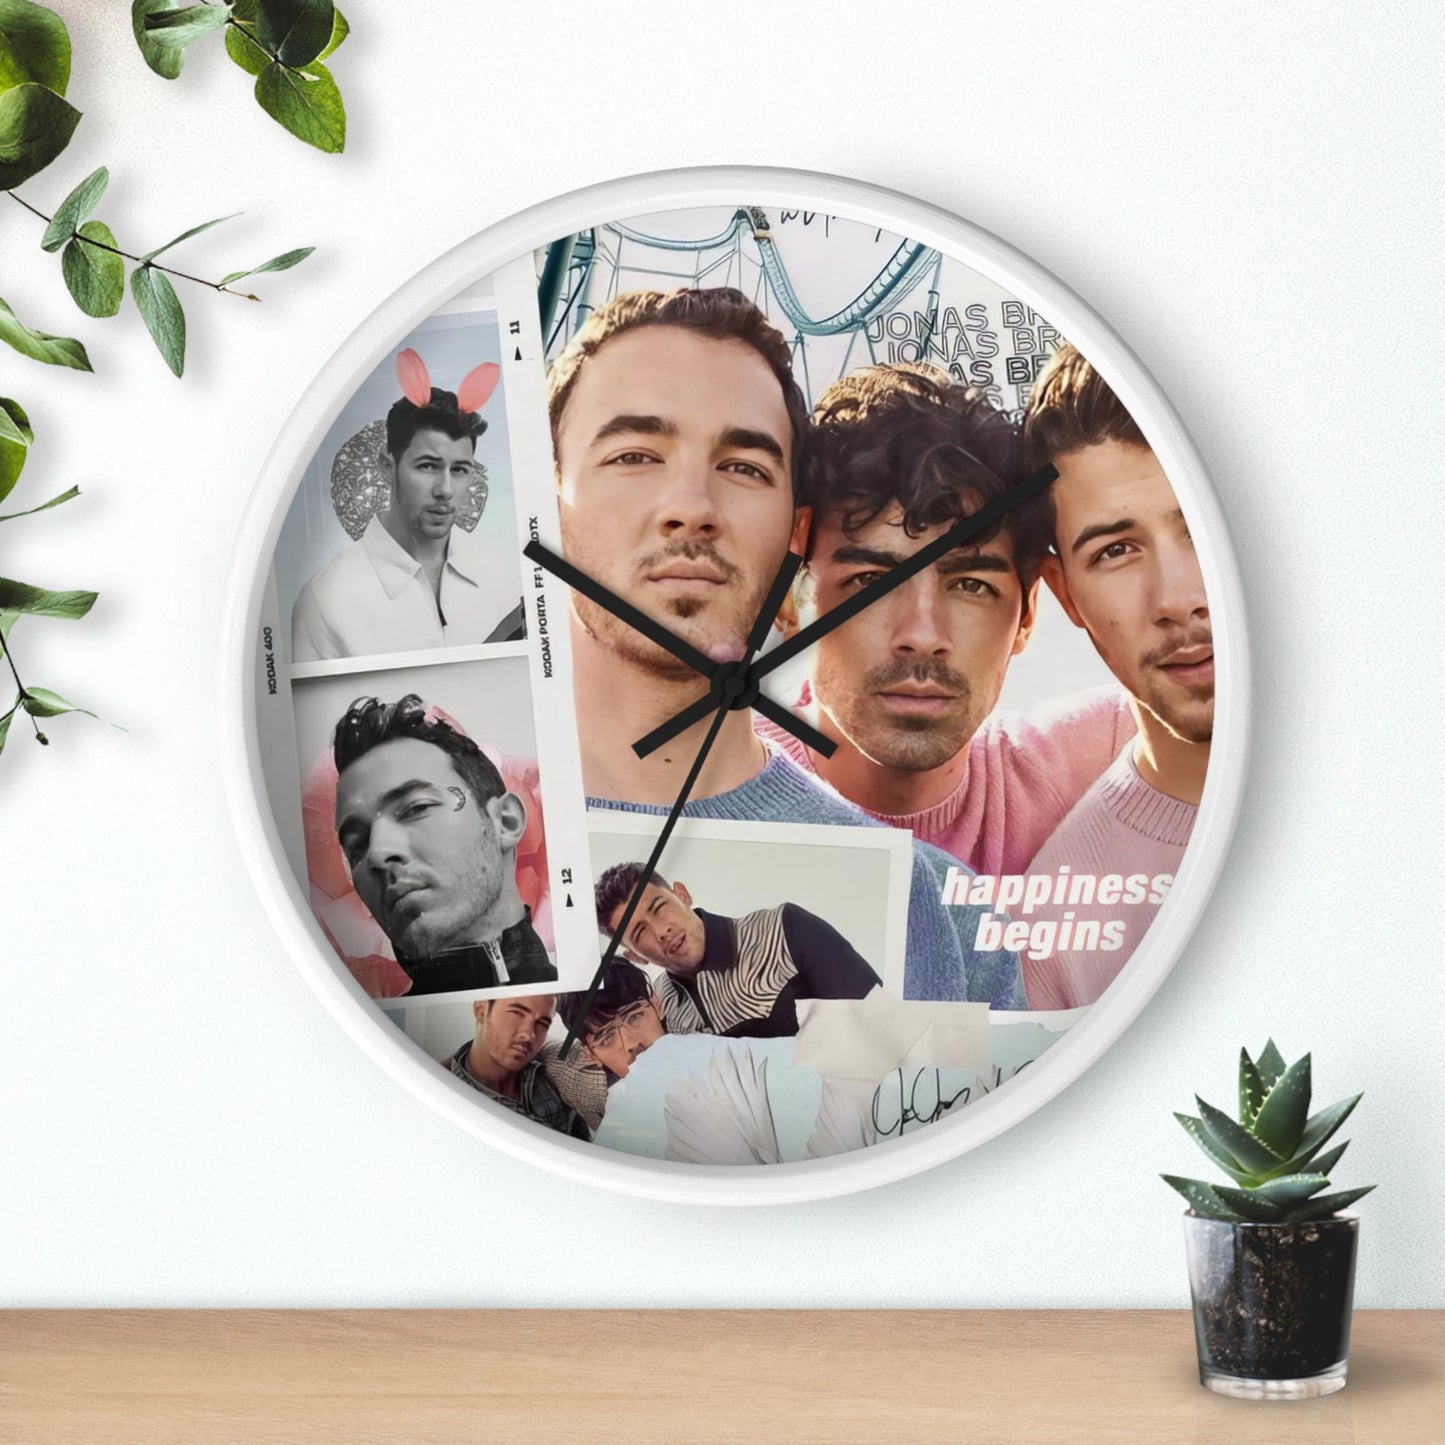 Jonas Brother Happiness Begins Collage Round Wall Clock